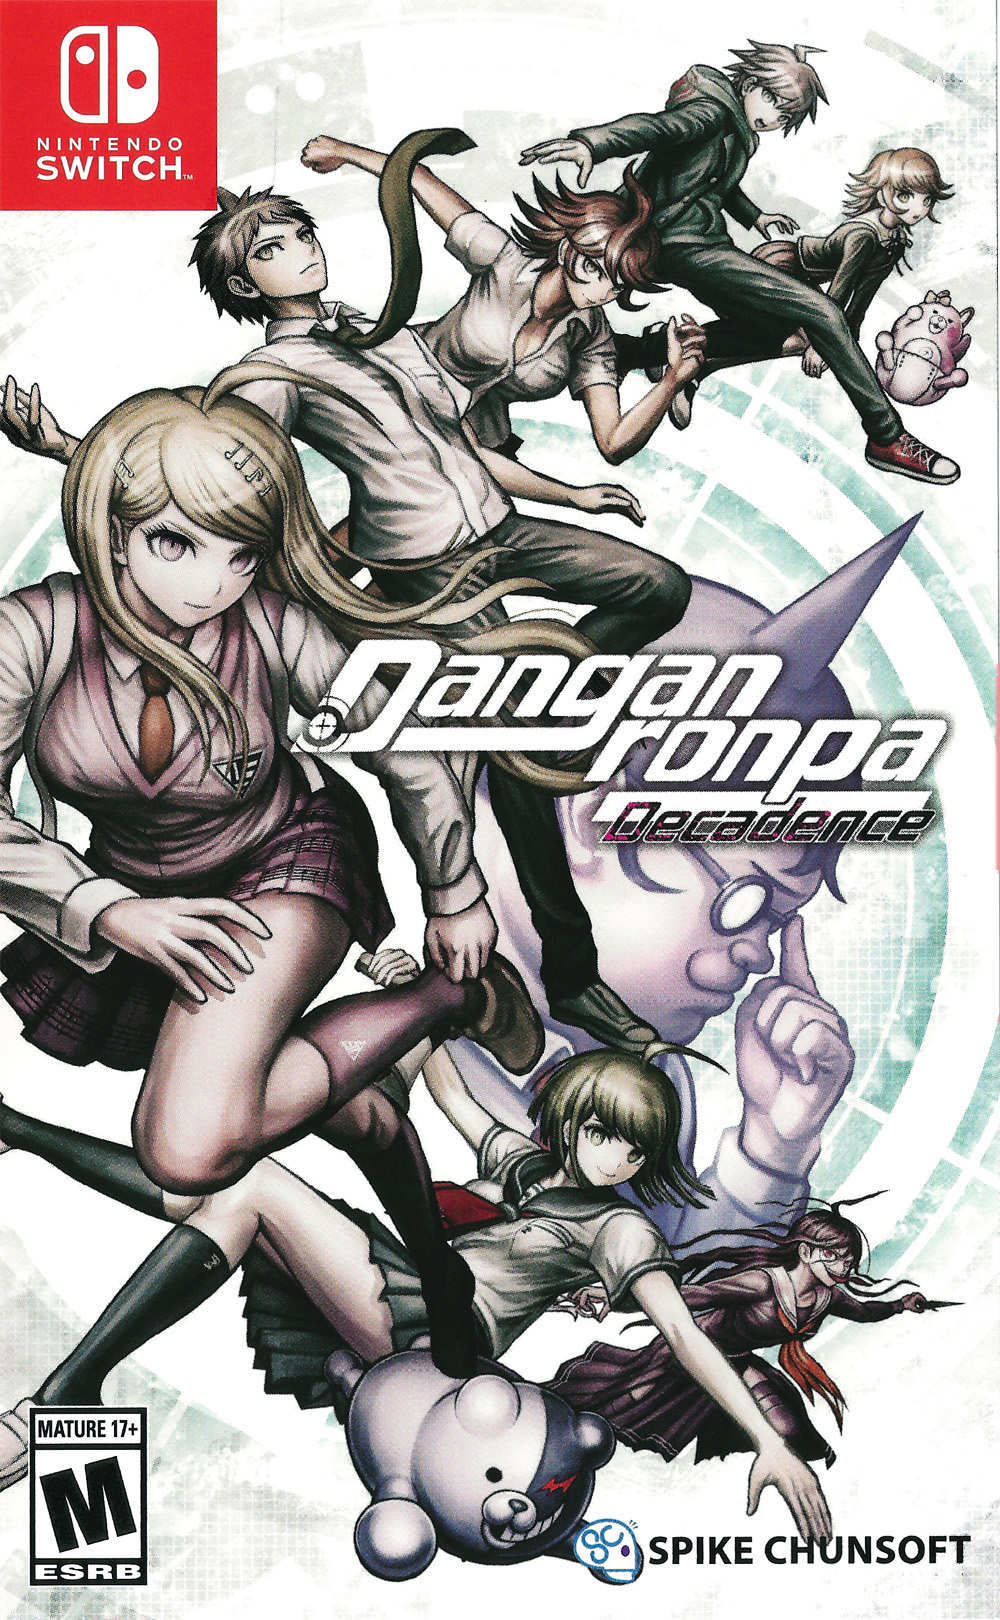 The cover to Danganronpa: Decadence, a re-release of the popular death game visual novel series